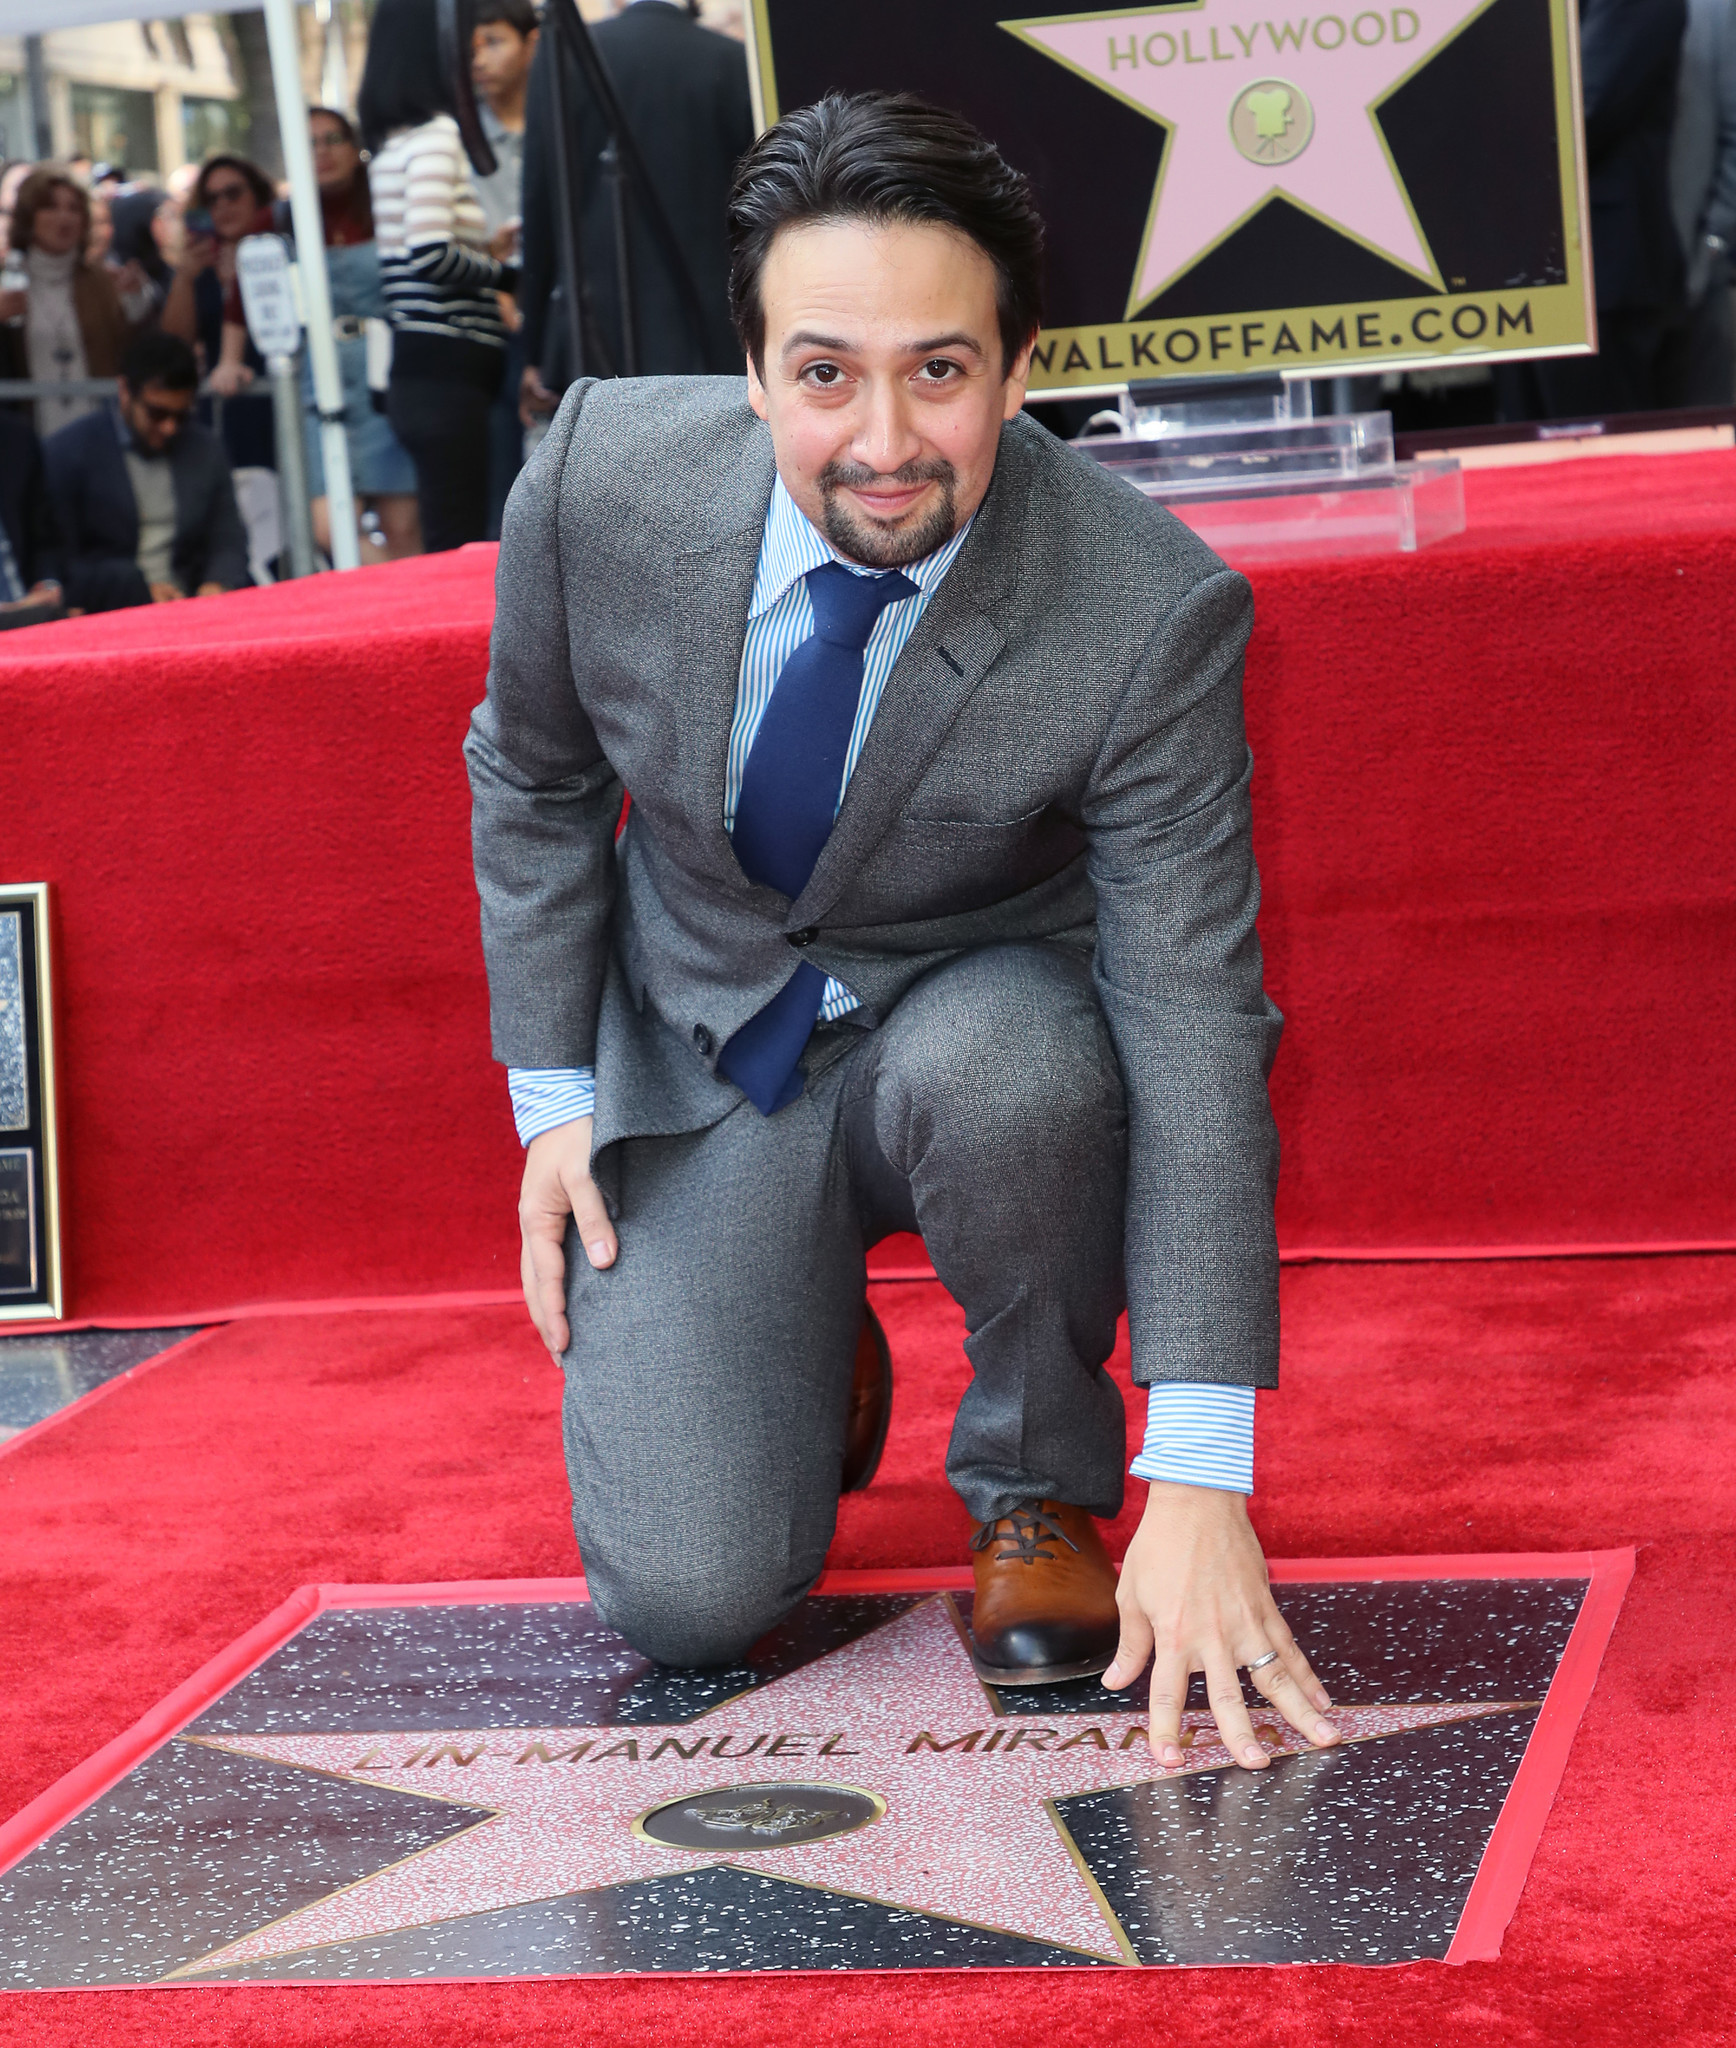 Lin-Manuel Miranda was all smiles on Nov. 30, 2018 when he was given a star on the Hollywood Walk of Fame in Los Angeles, Calif. The actor and playwright, accompanied by wife Vanessa Nadal and famous friends Rita Moreno and Weird 